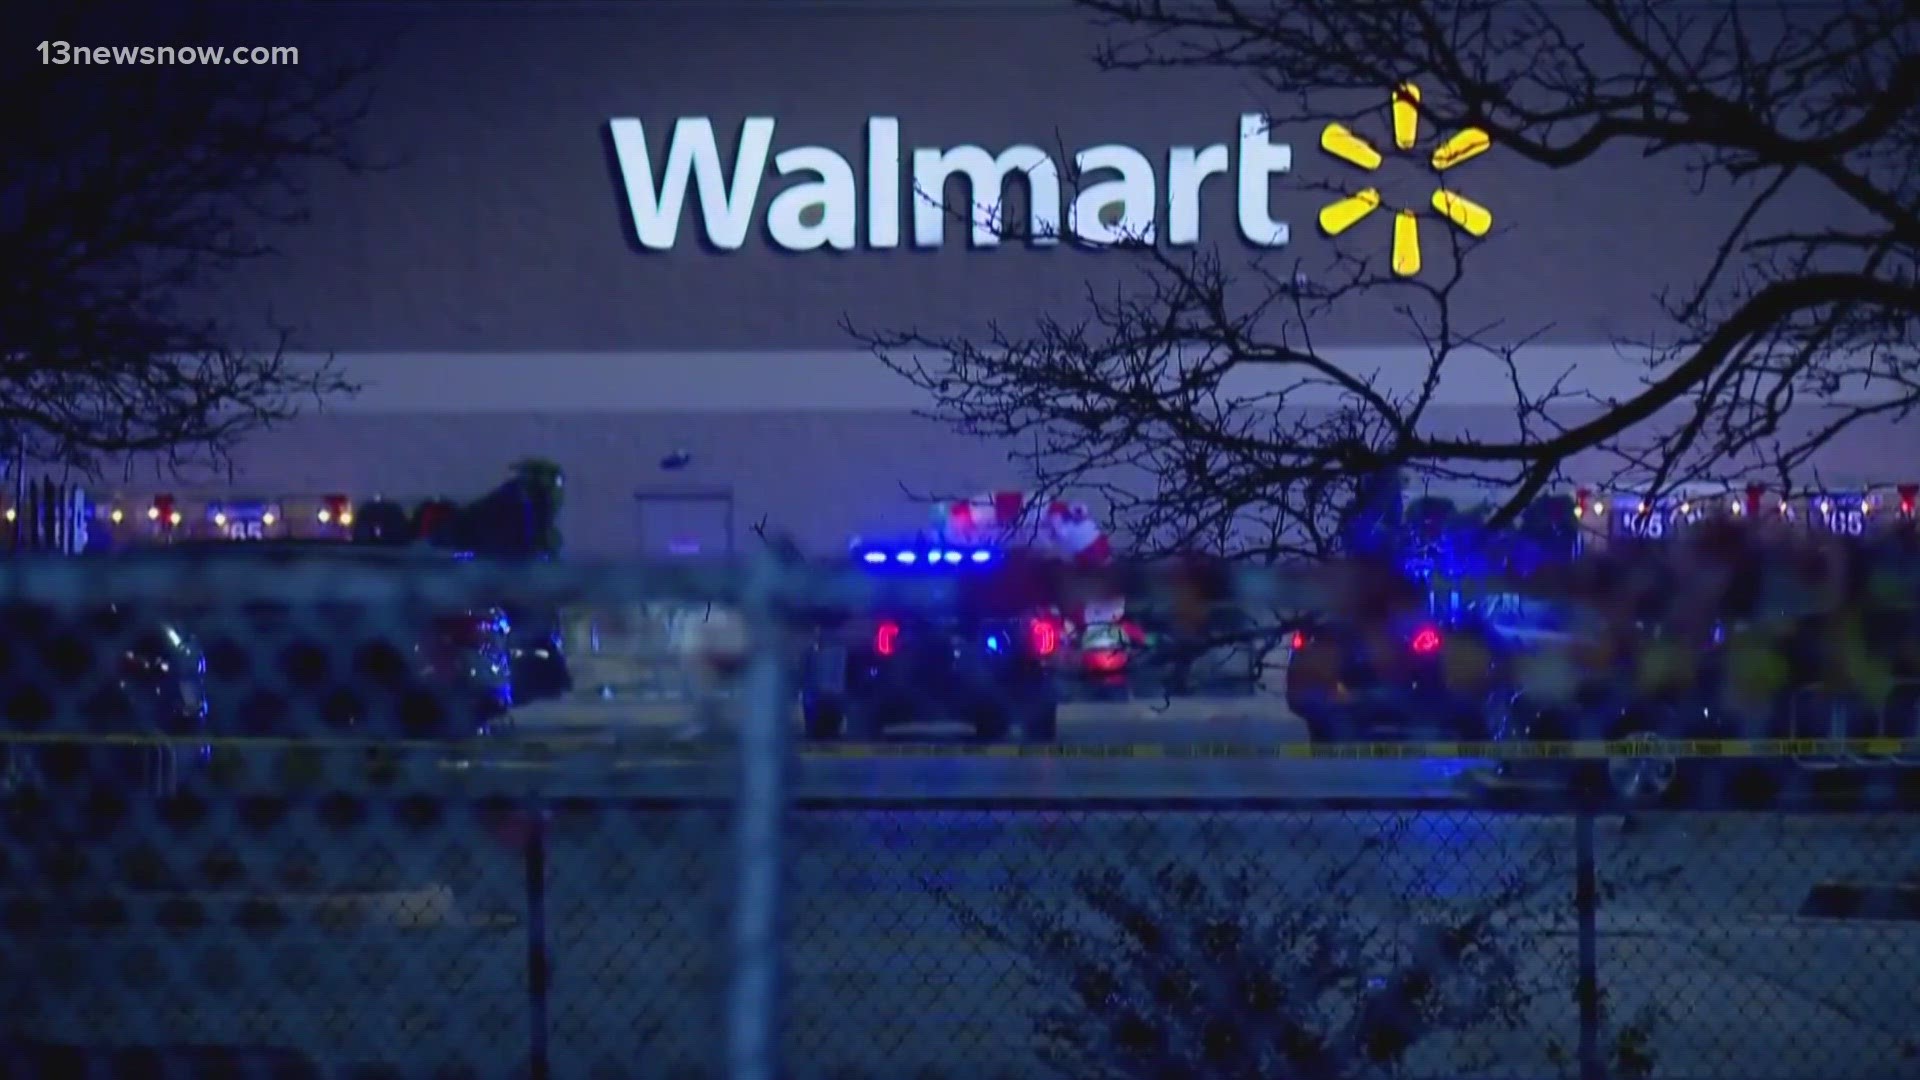 The ruling comes after Walmart challenged several claims made by Briana Tyler, who argues she was specifically targeted in the shooting that left seven people dead.